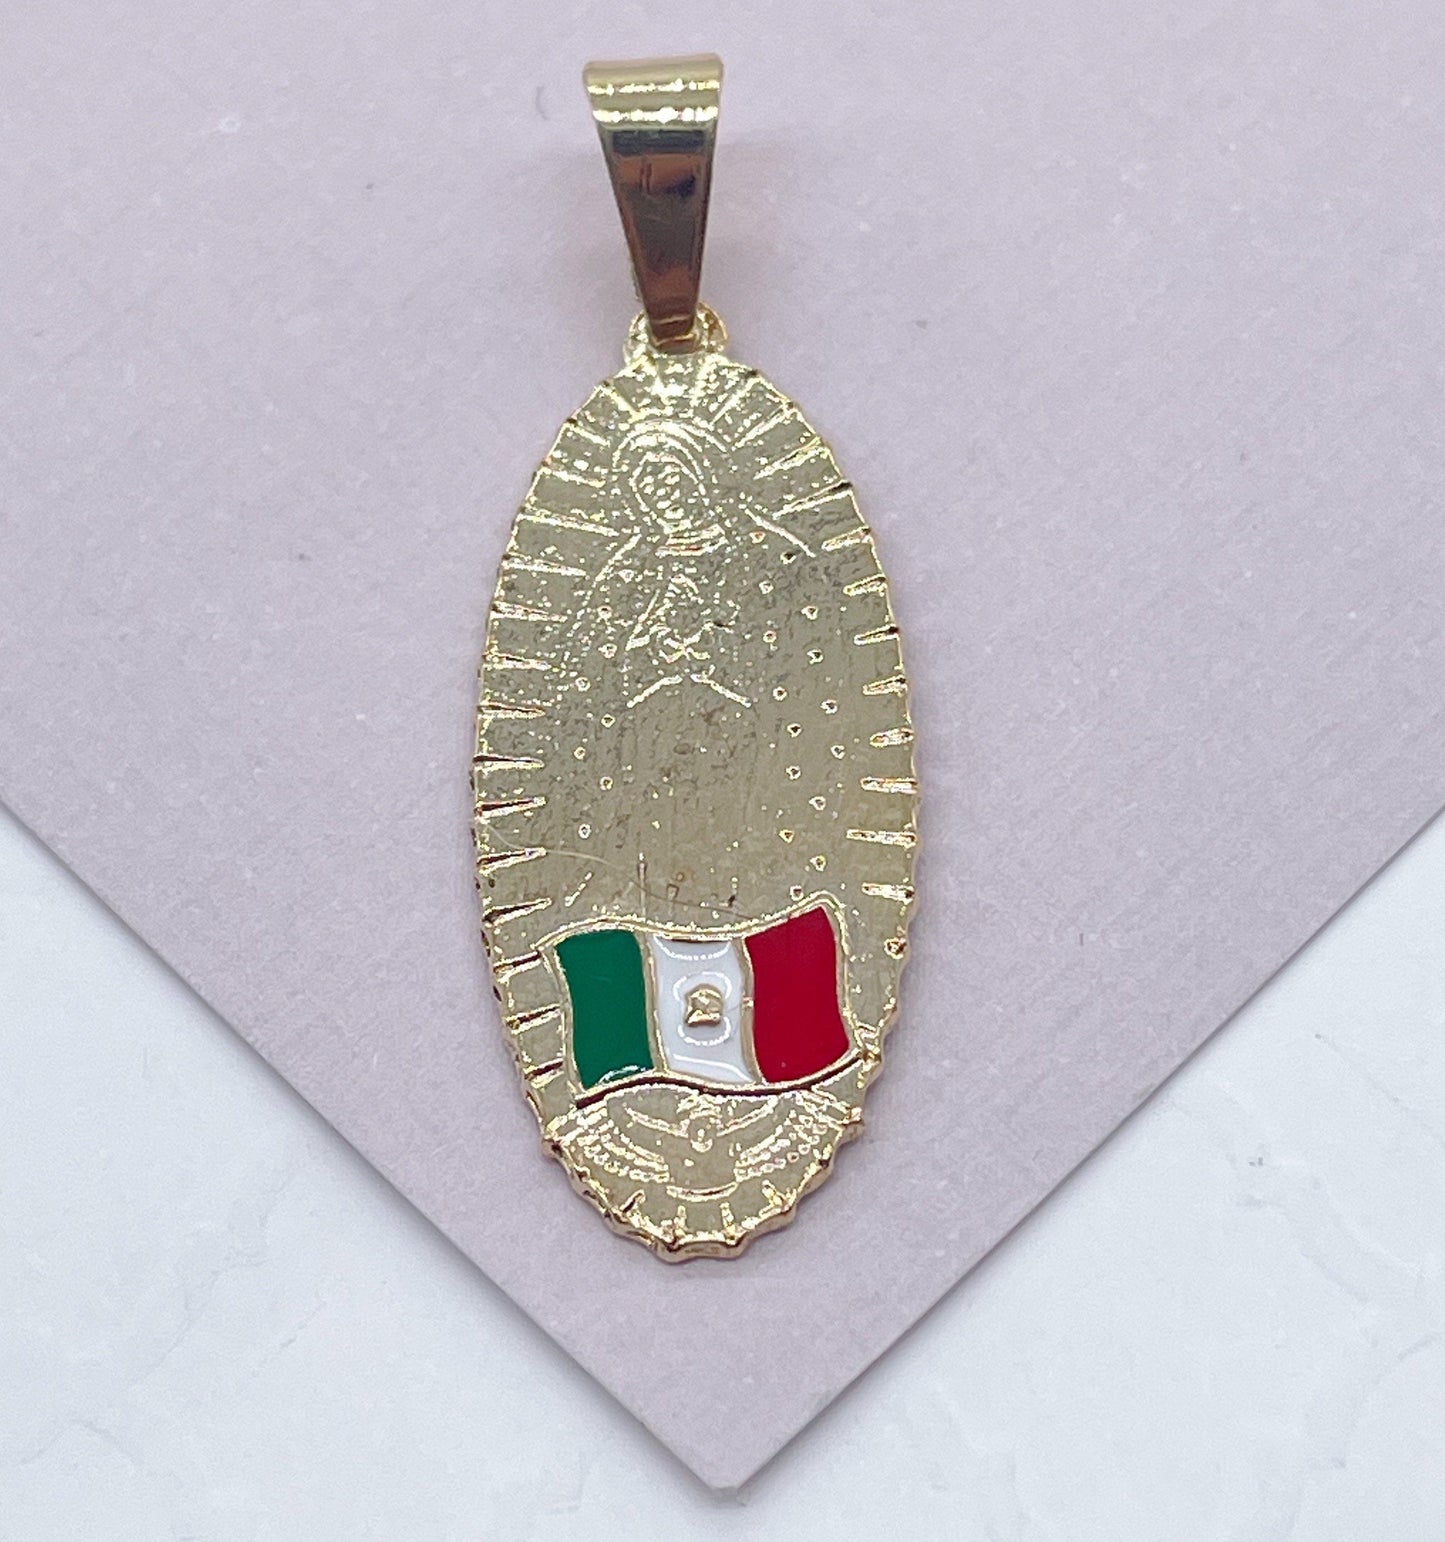 18k Gold Layered Oval Shaped Our Lady of Guadalupe Pendant Featuring Mexican Flag